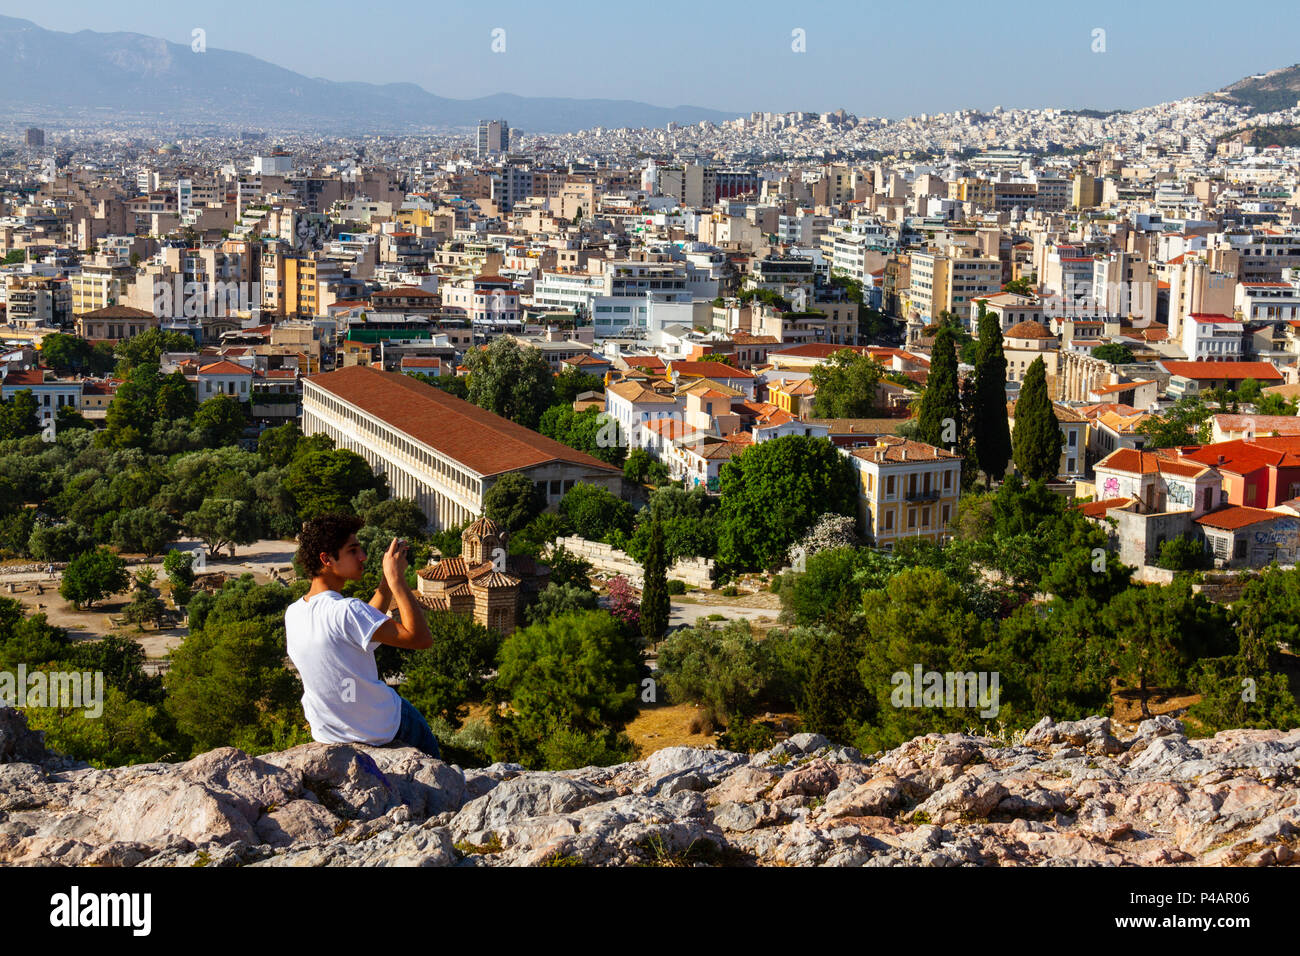 Athens, Greece - June 9, 2018: Toutist sitting on a rock across the Acropolis taking a photo of the Athens cityscape on a summer afternoon Stock Photo